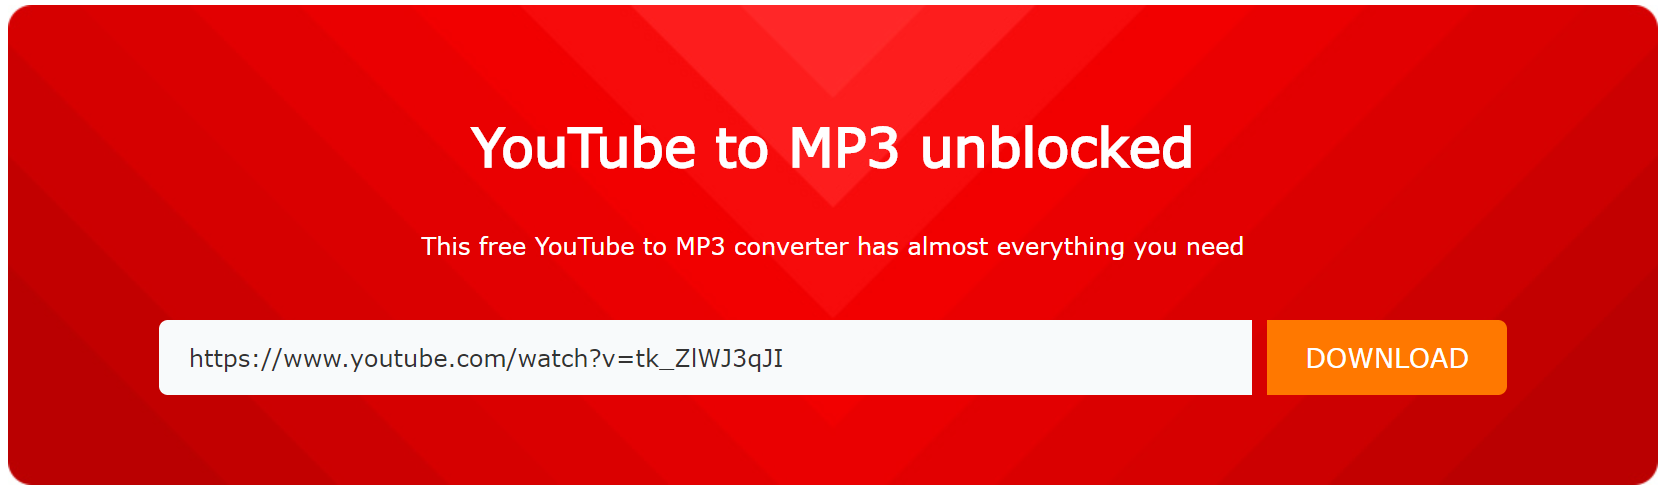 youtube mp3 download unblocked